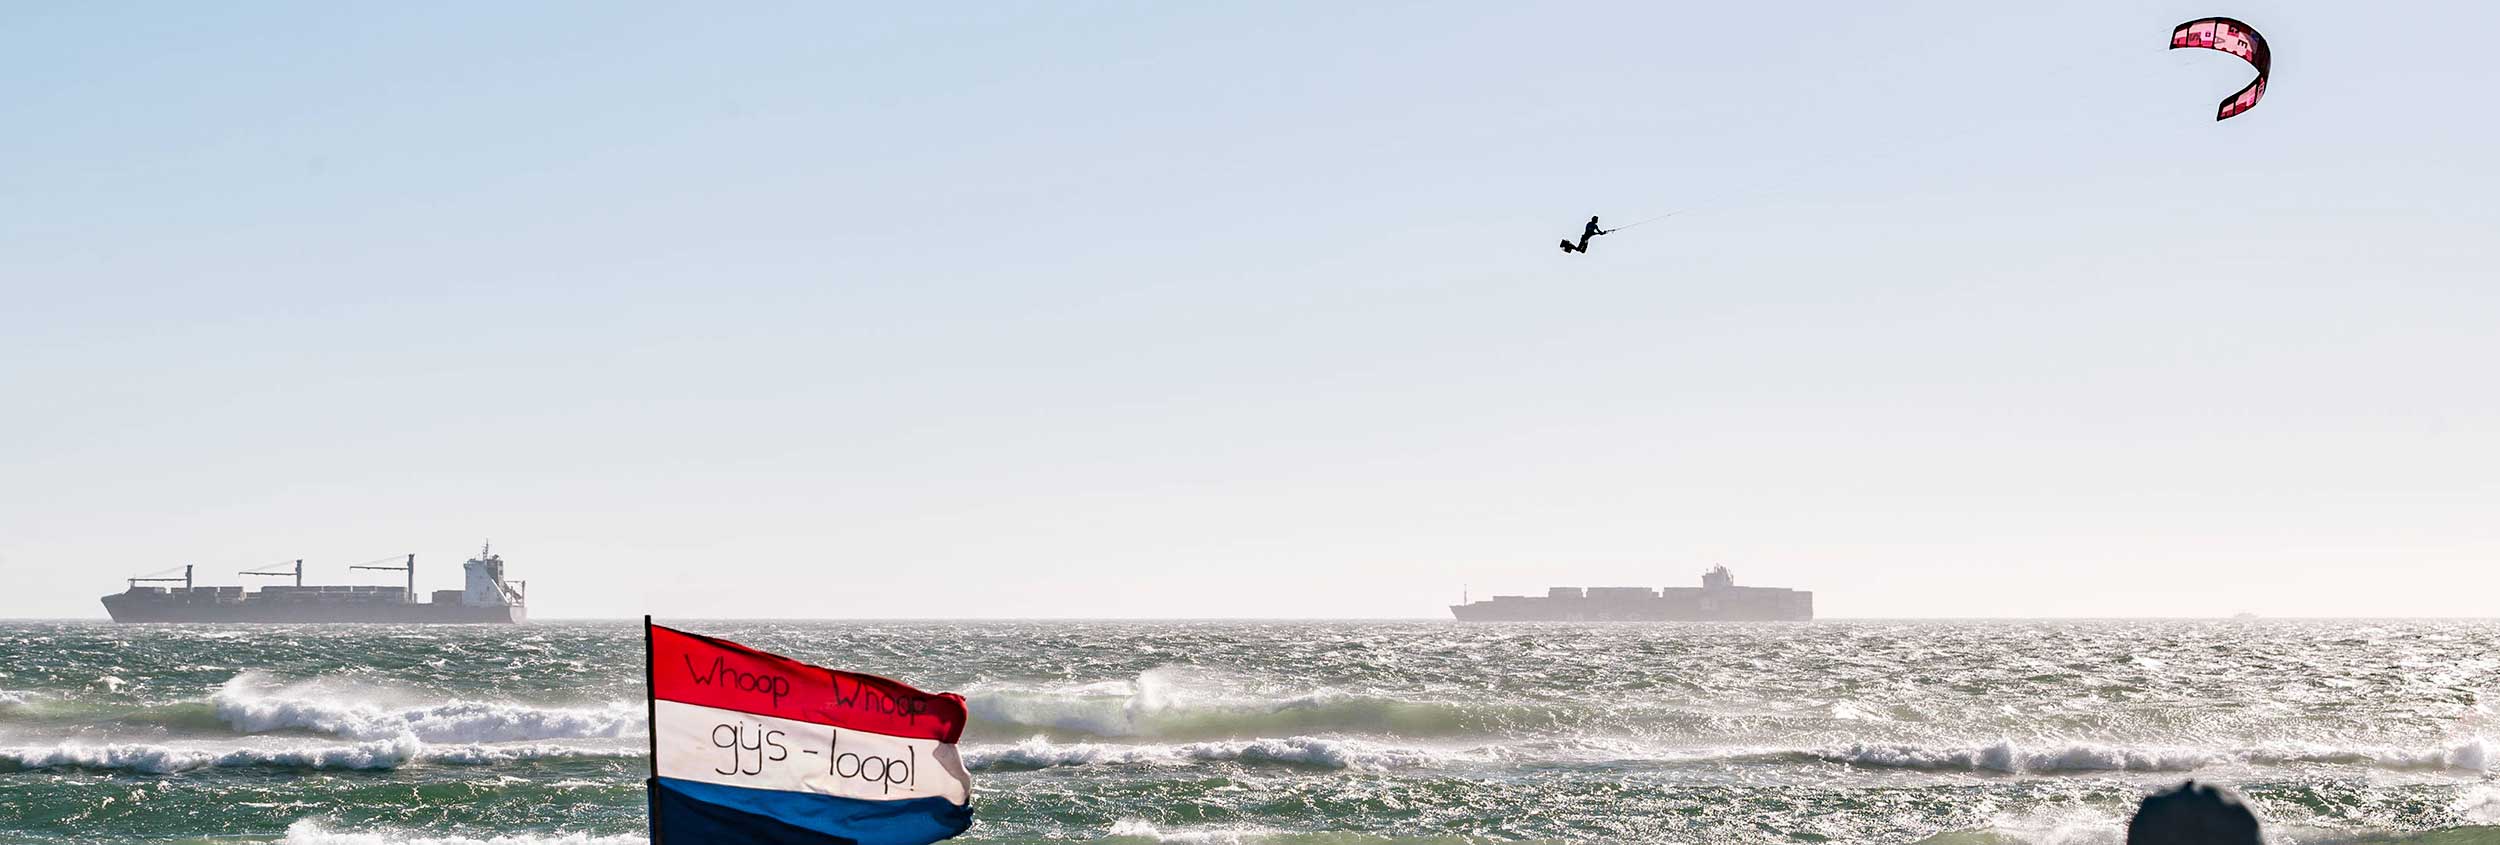 Gijs Wassenar Red Bull King of the Air 2018